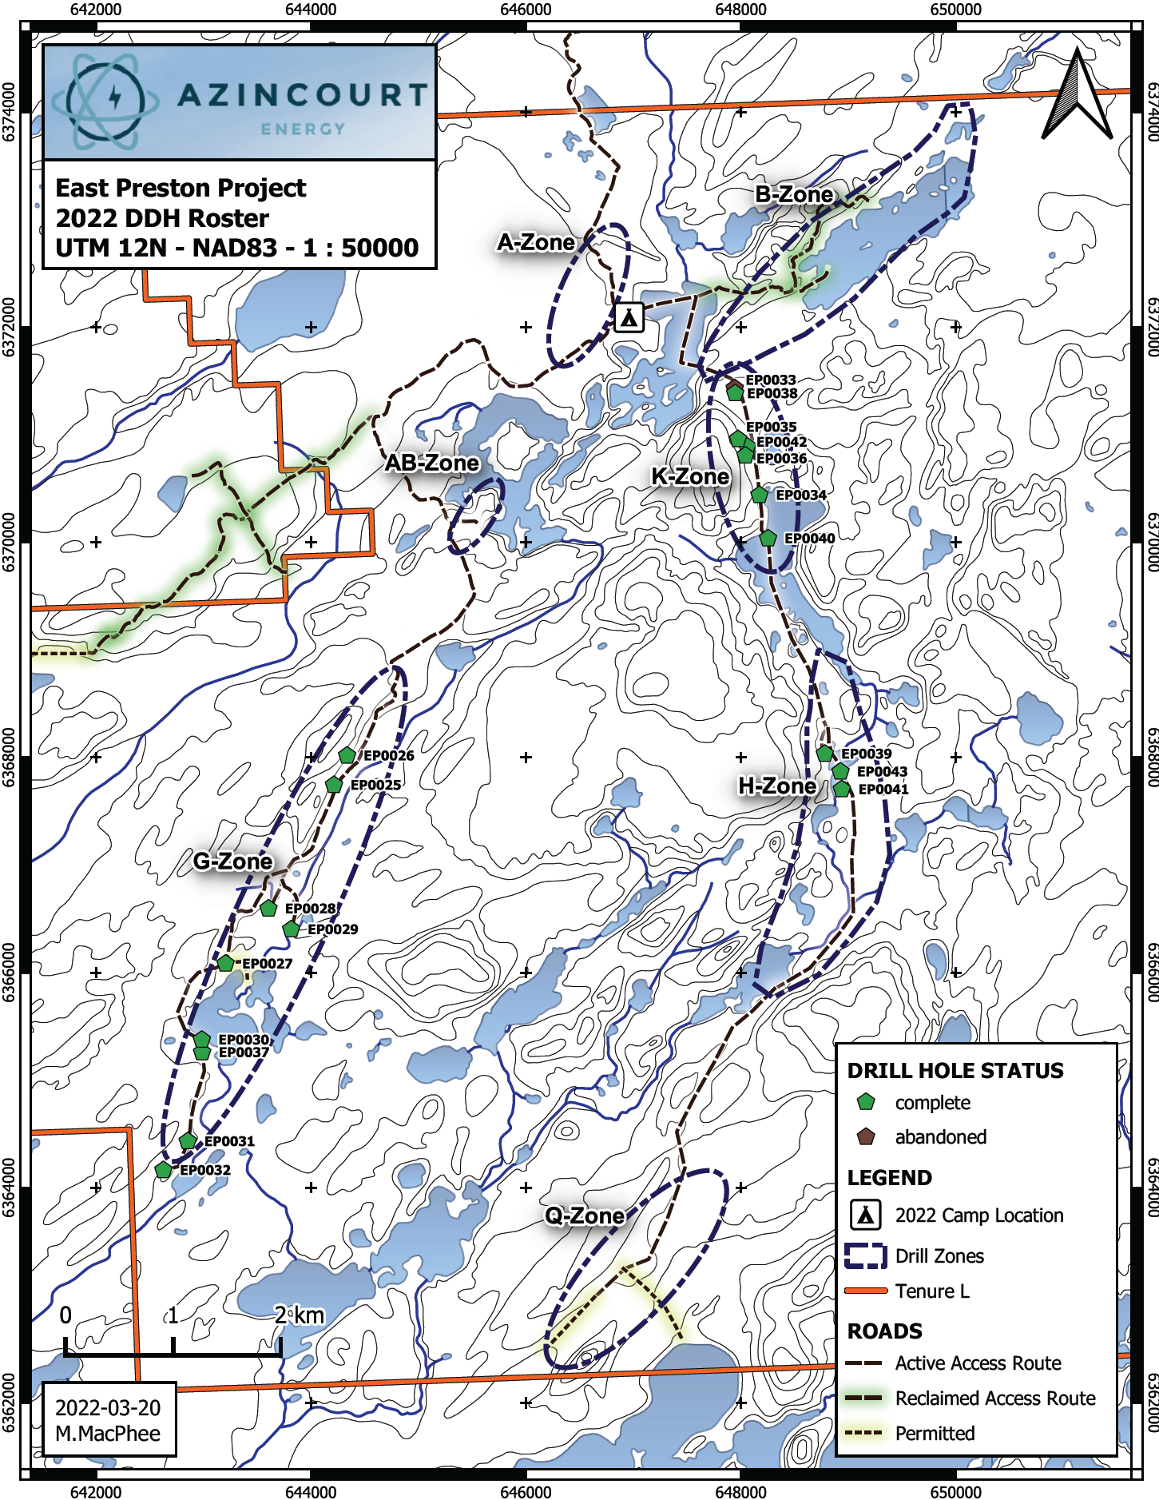 Figure 2: 2022 Drill Holes and Target areas at the East Preston Uranium Project